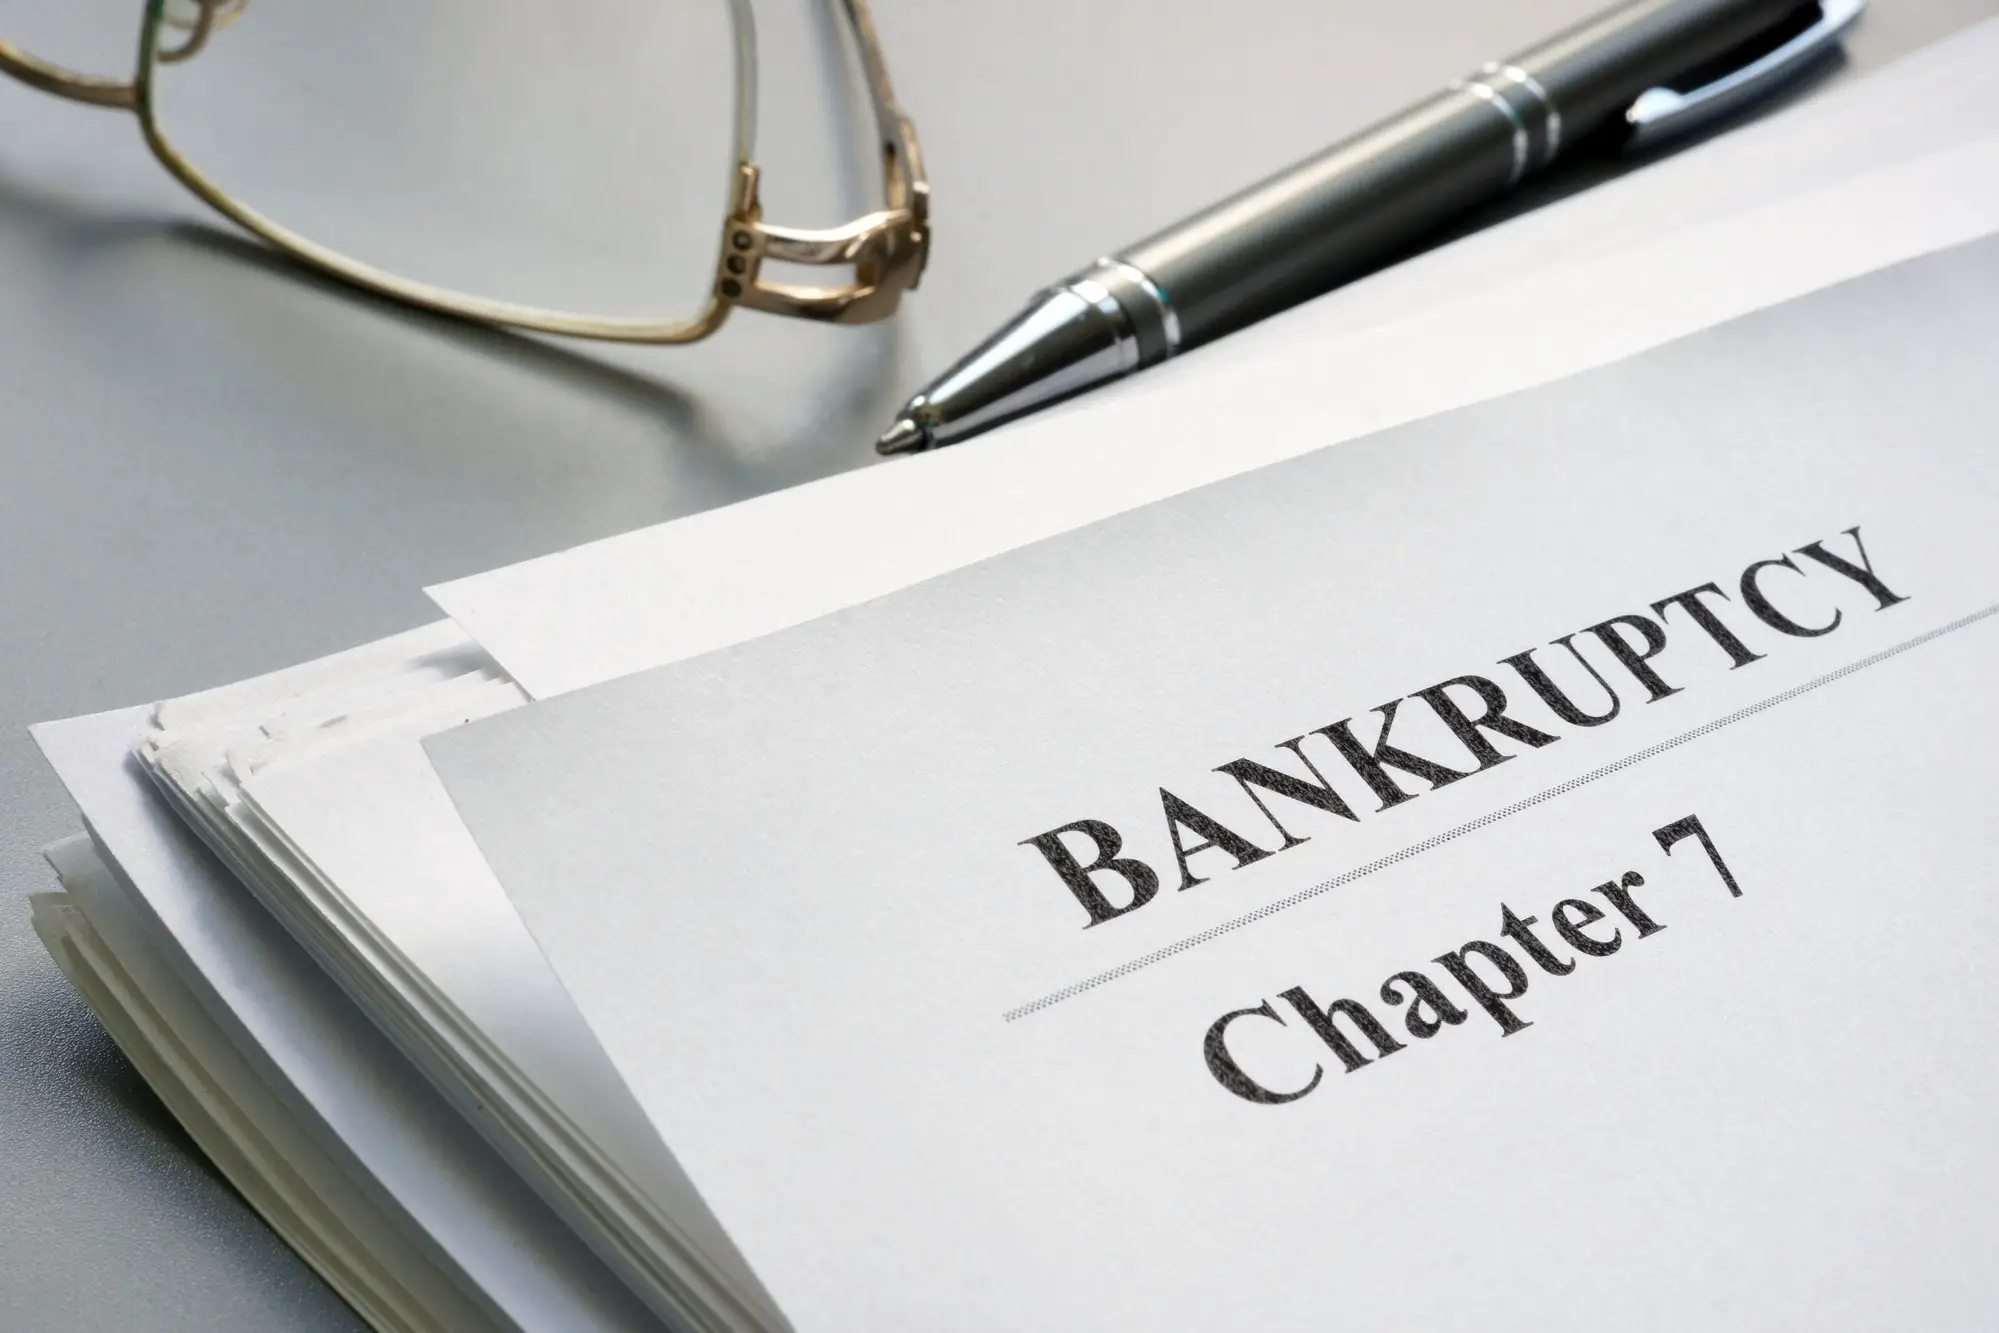 How Much Does it Cost to Declare Bankruptcy?